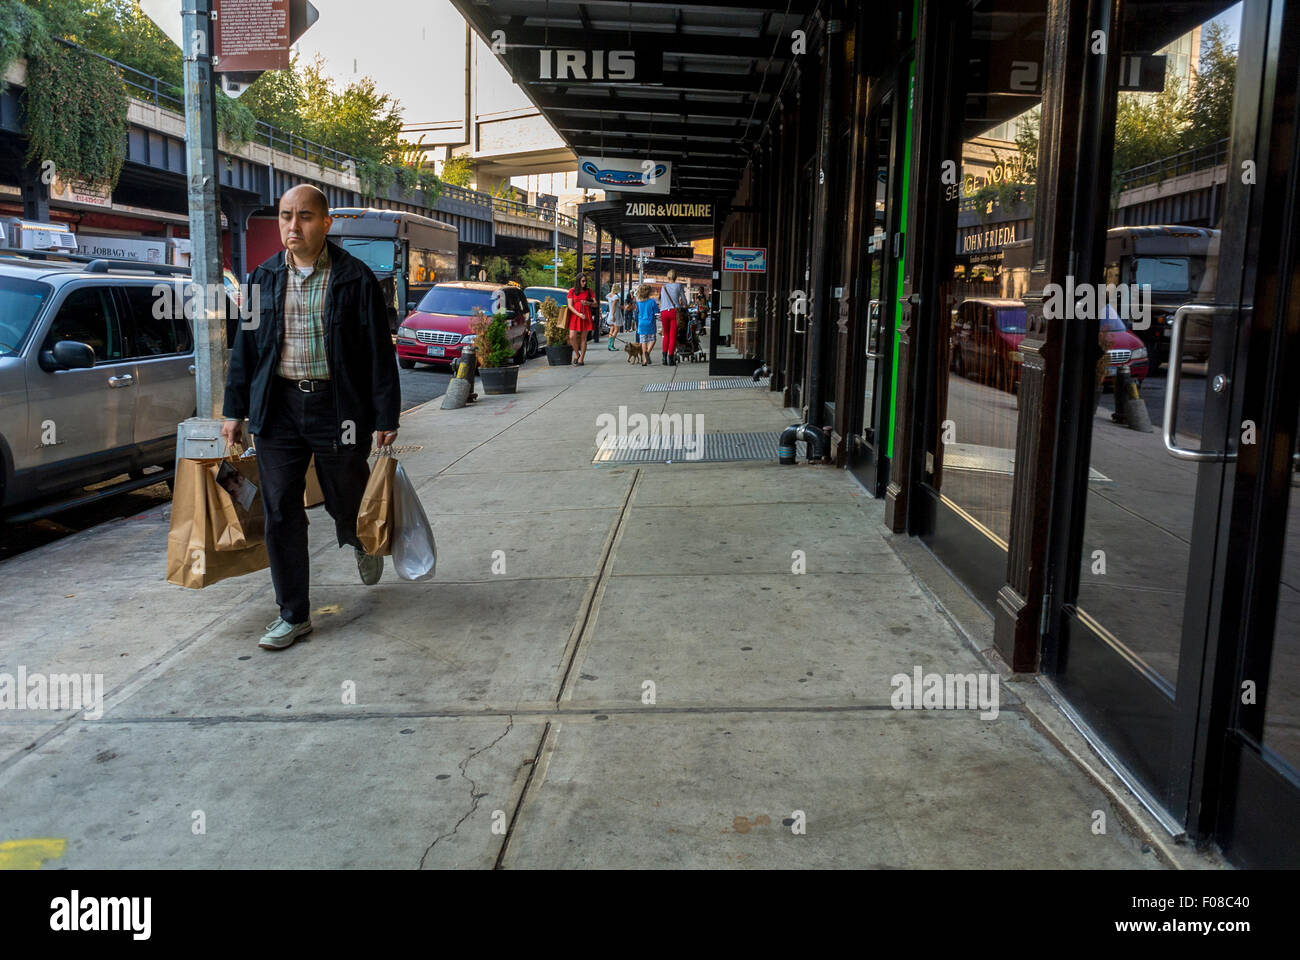 New York City, USA, Street Scenes, Meat Packing District, Man Carrying Shopping Bags, Clothing Fashion, urban walking, garment shops exterior Stock Photo